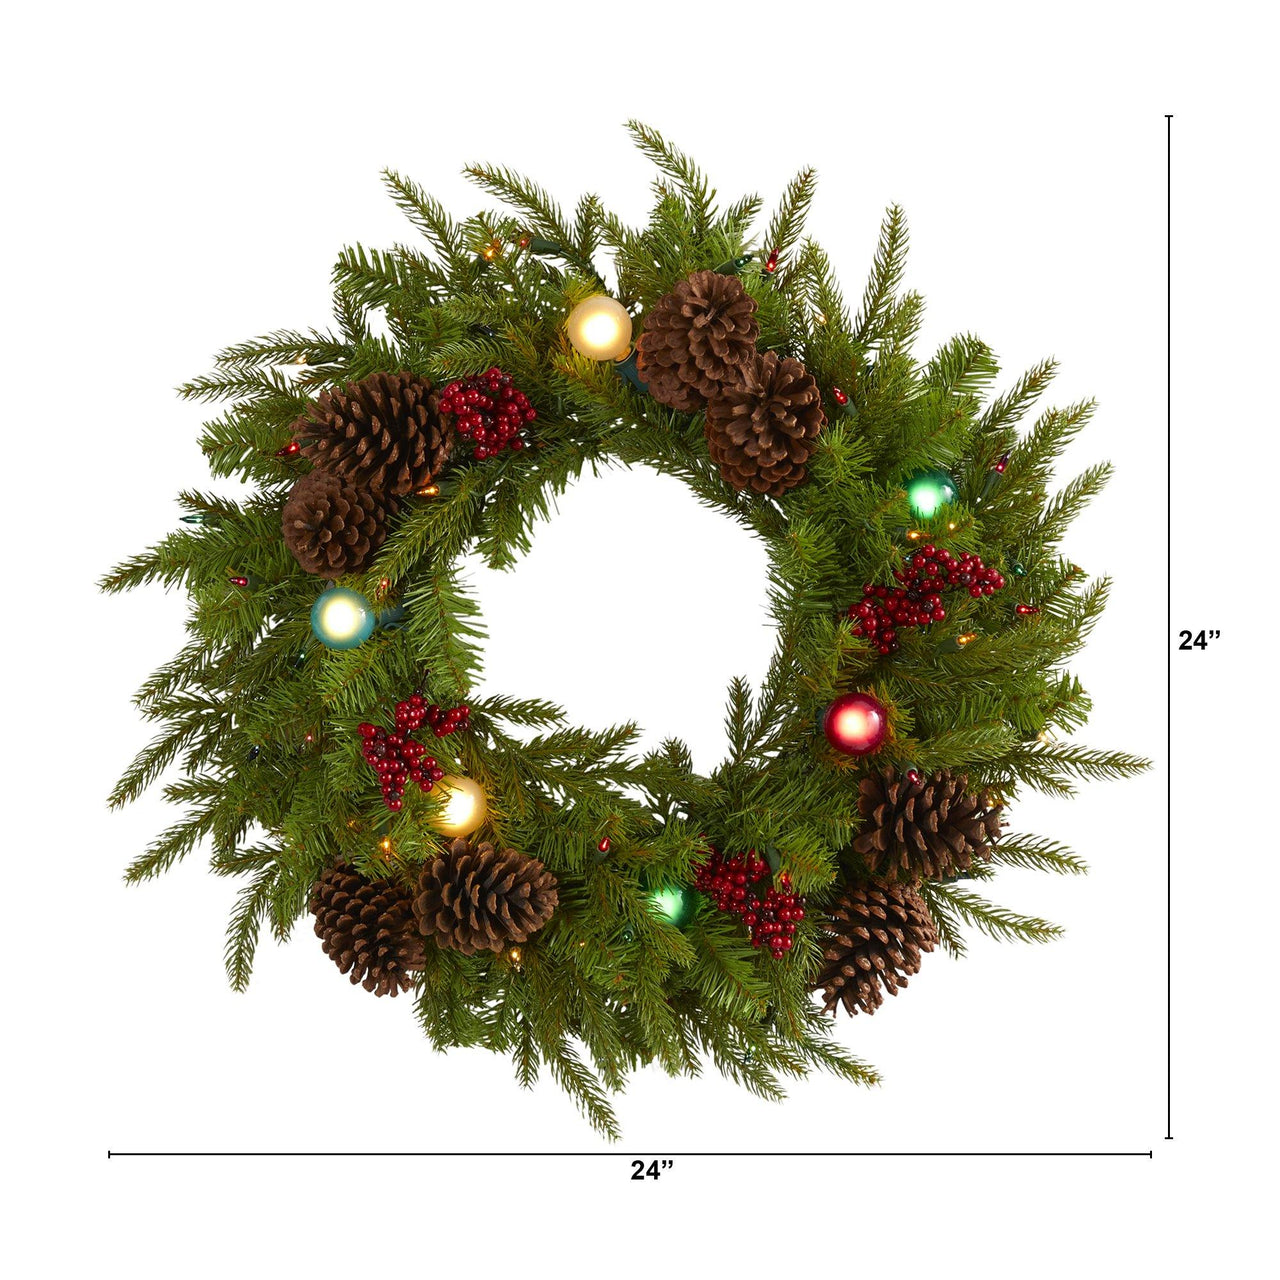 24” Christmas Artificial Wreath with 50 Multicolored Lights, 7 Multicolored Globe Bulbs, Berries and Pine Cones - The Fox Decor